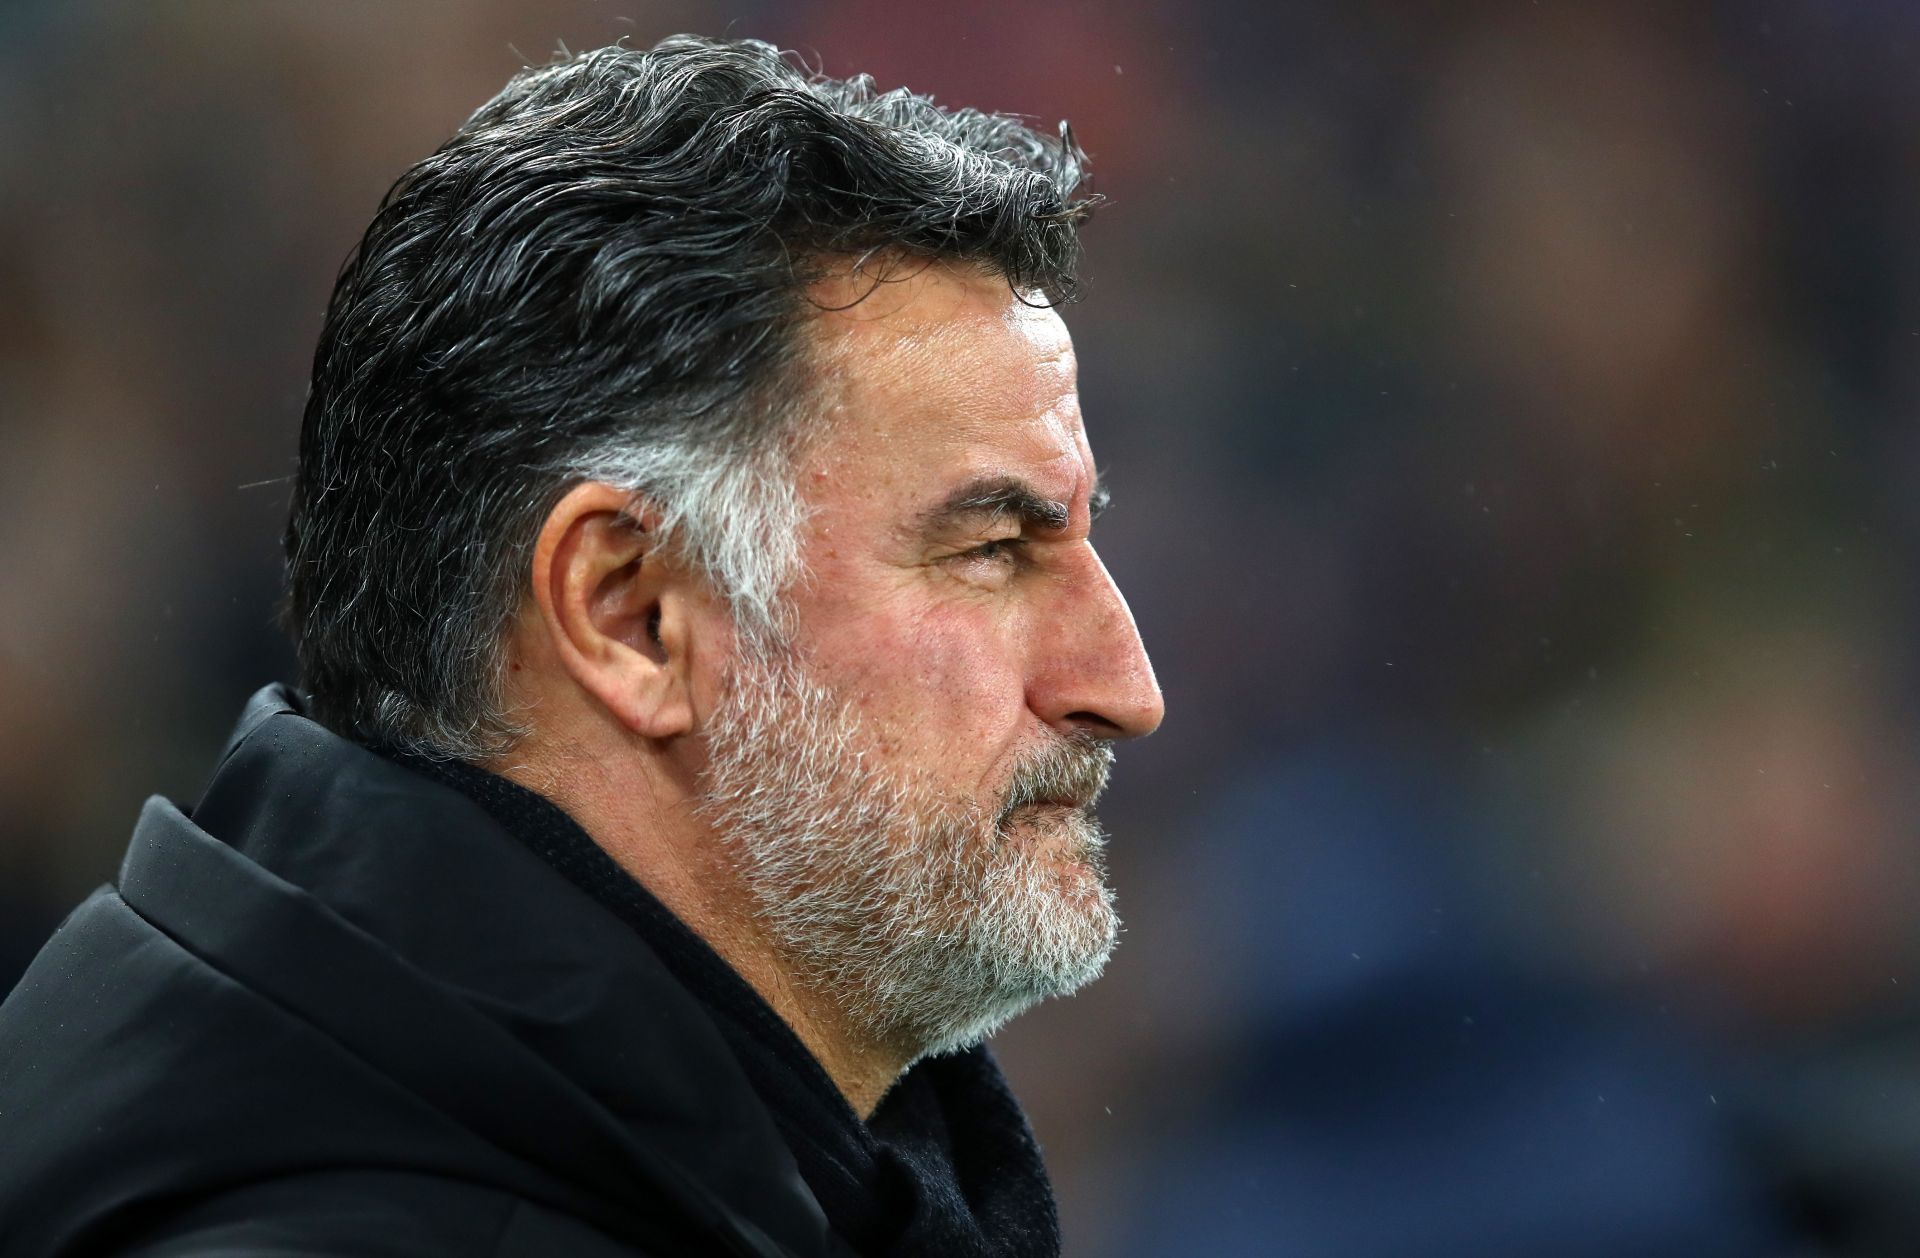 Christophe Galtier is likely to take charge at the Parc des Princes.